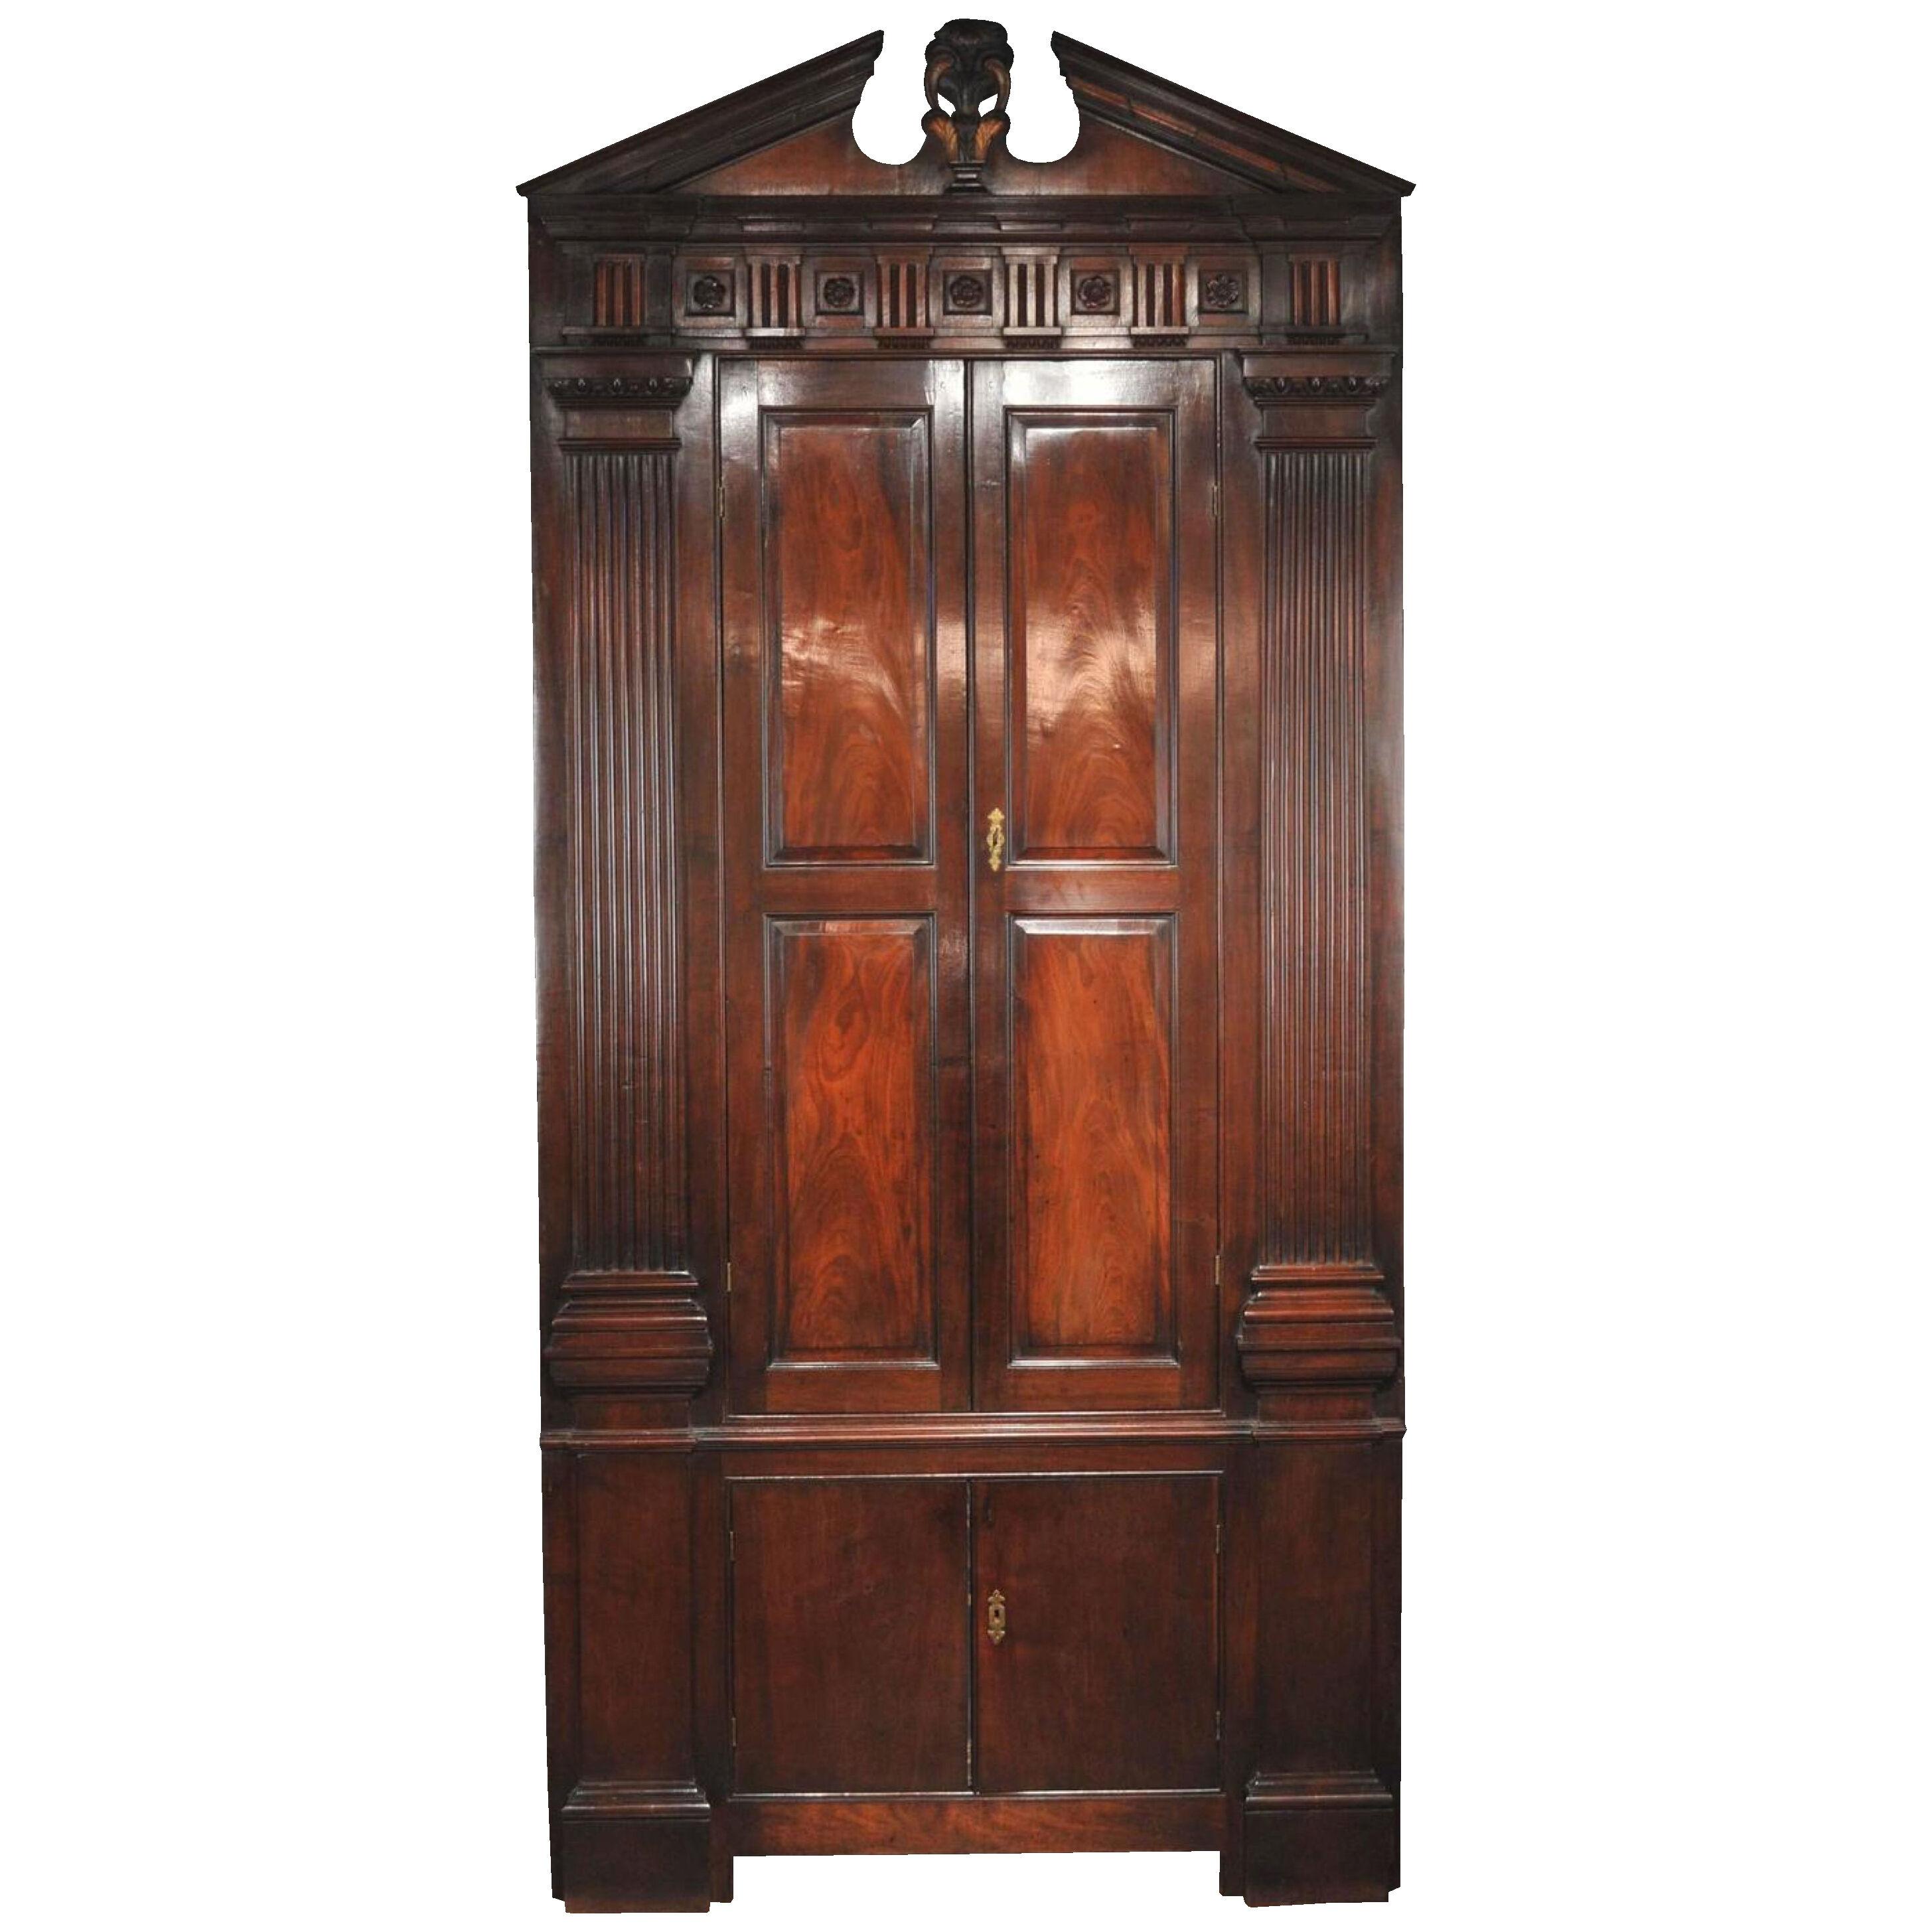 Early Georgian architectural corner cupboard attributable to Batty Langley